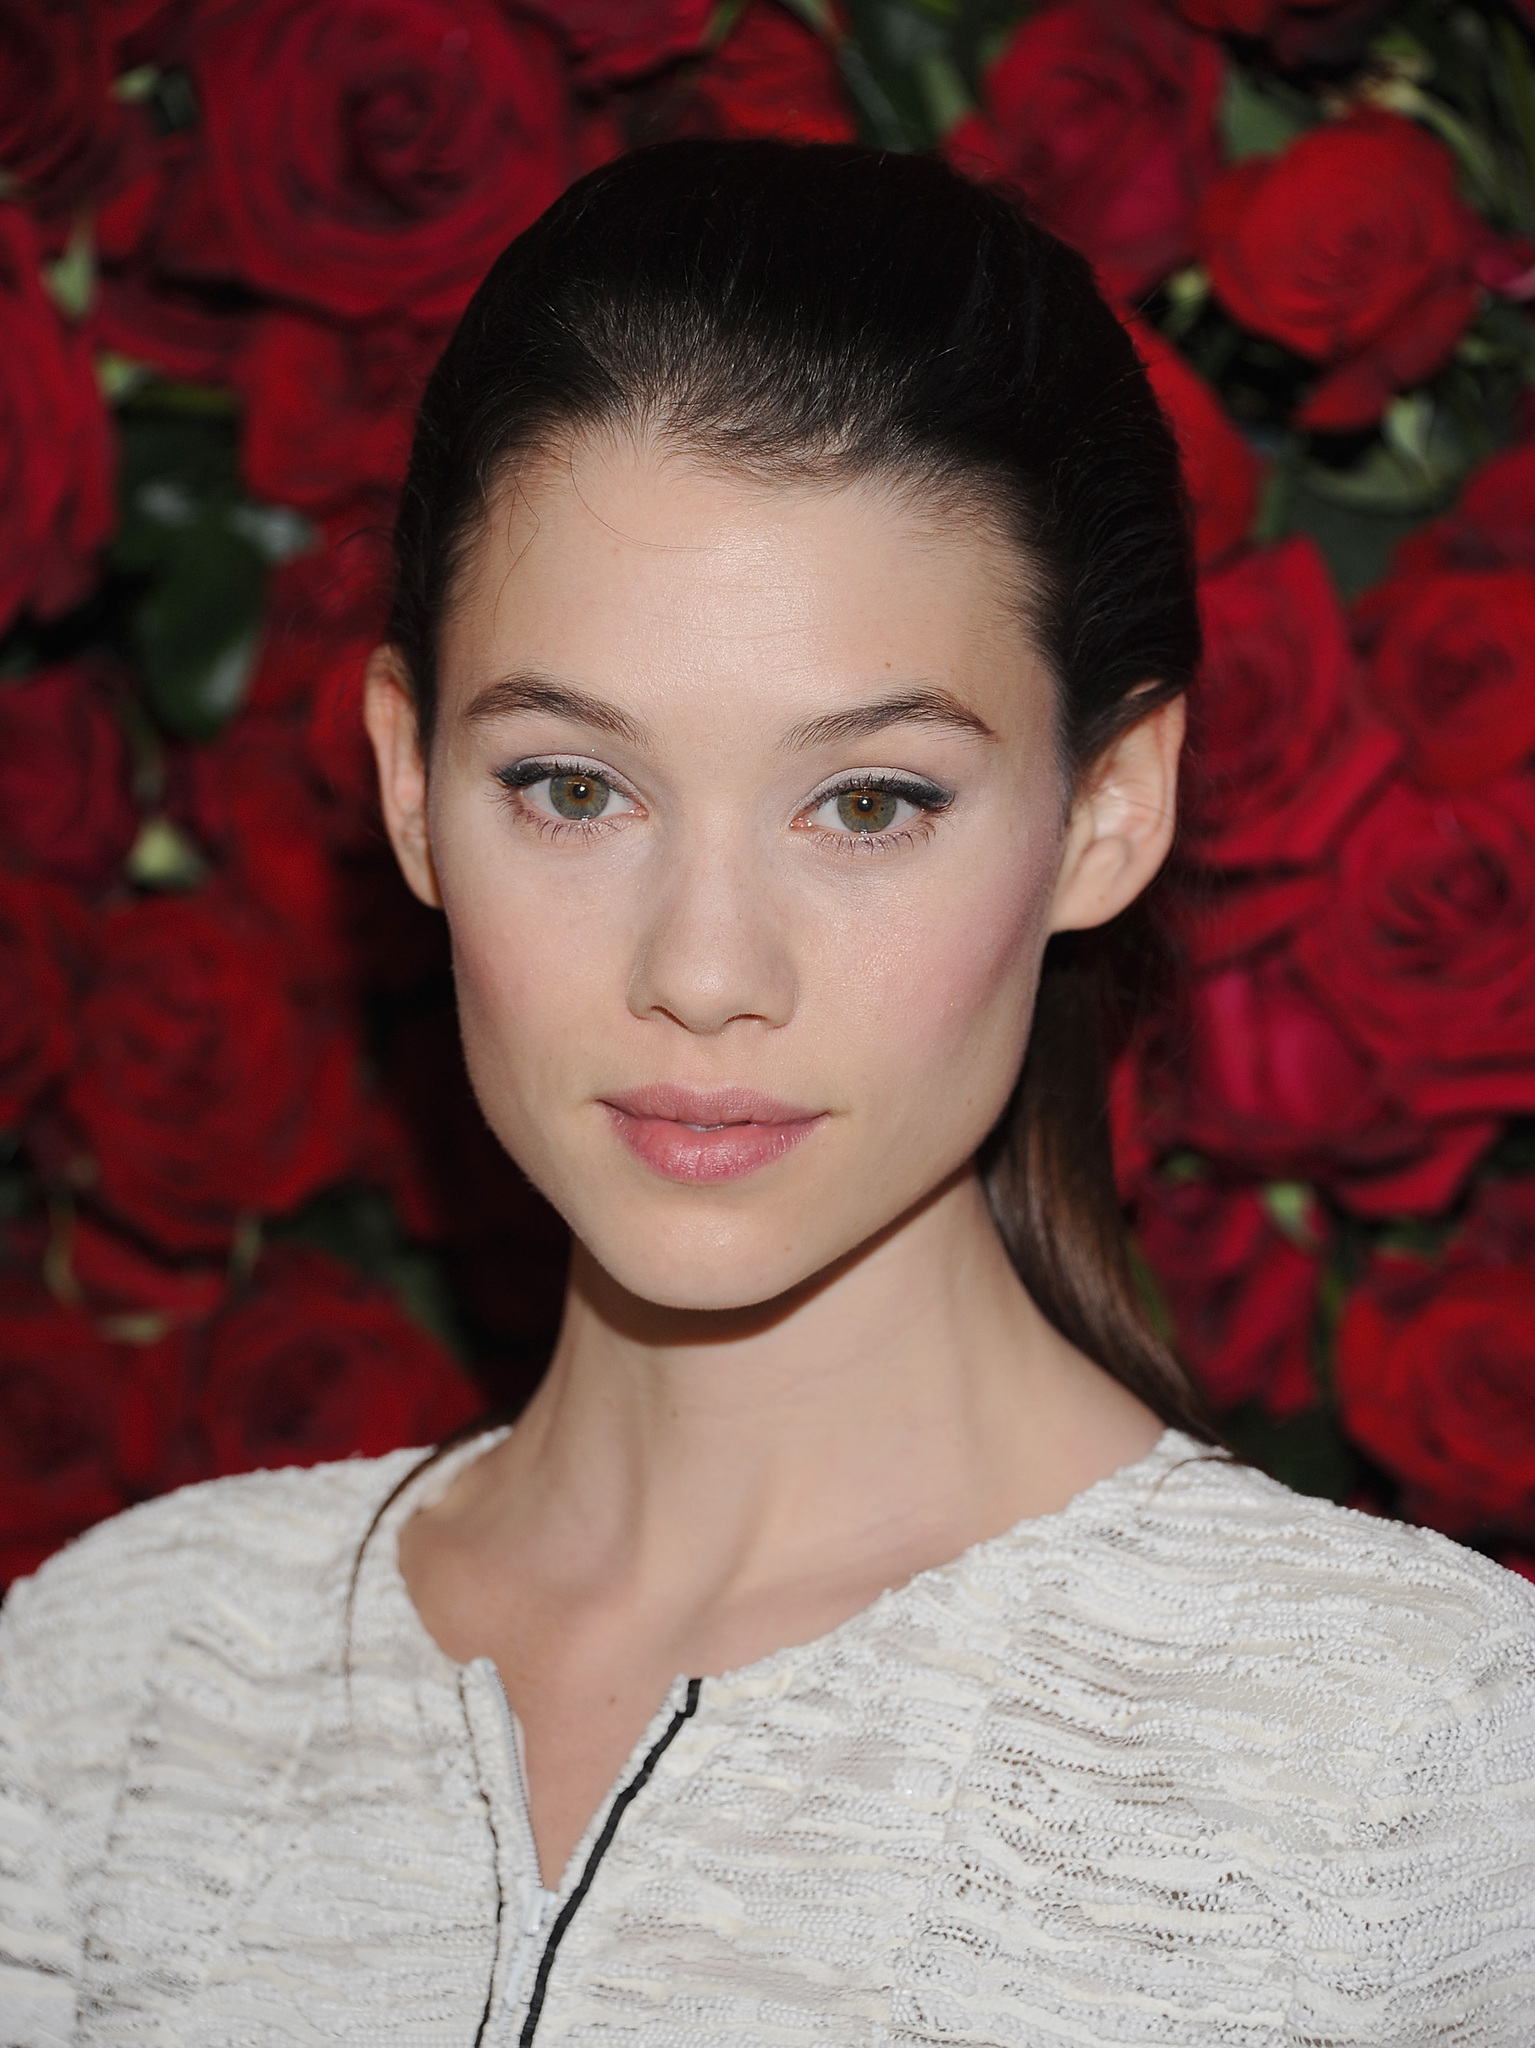 adeel aijaz recommends Astrid Berges Frisbey Feet